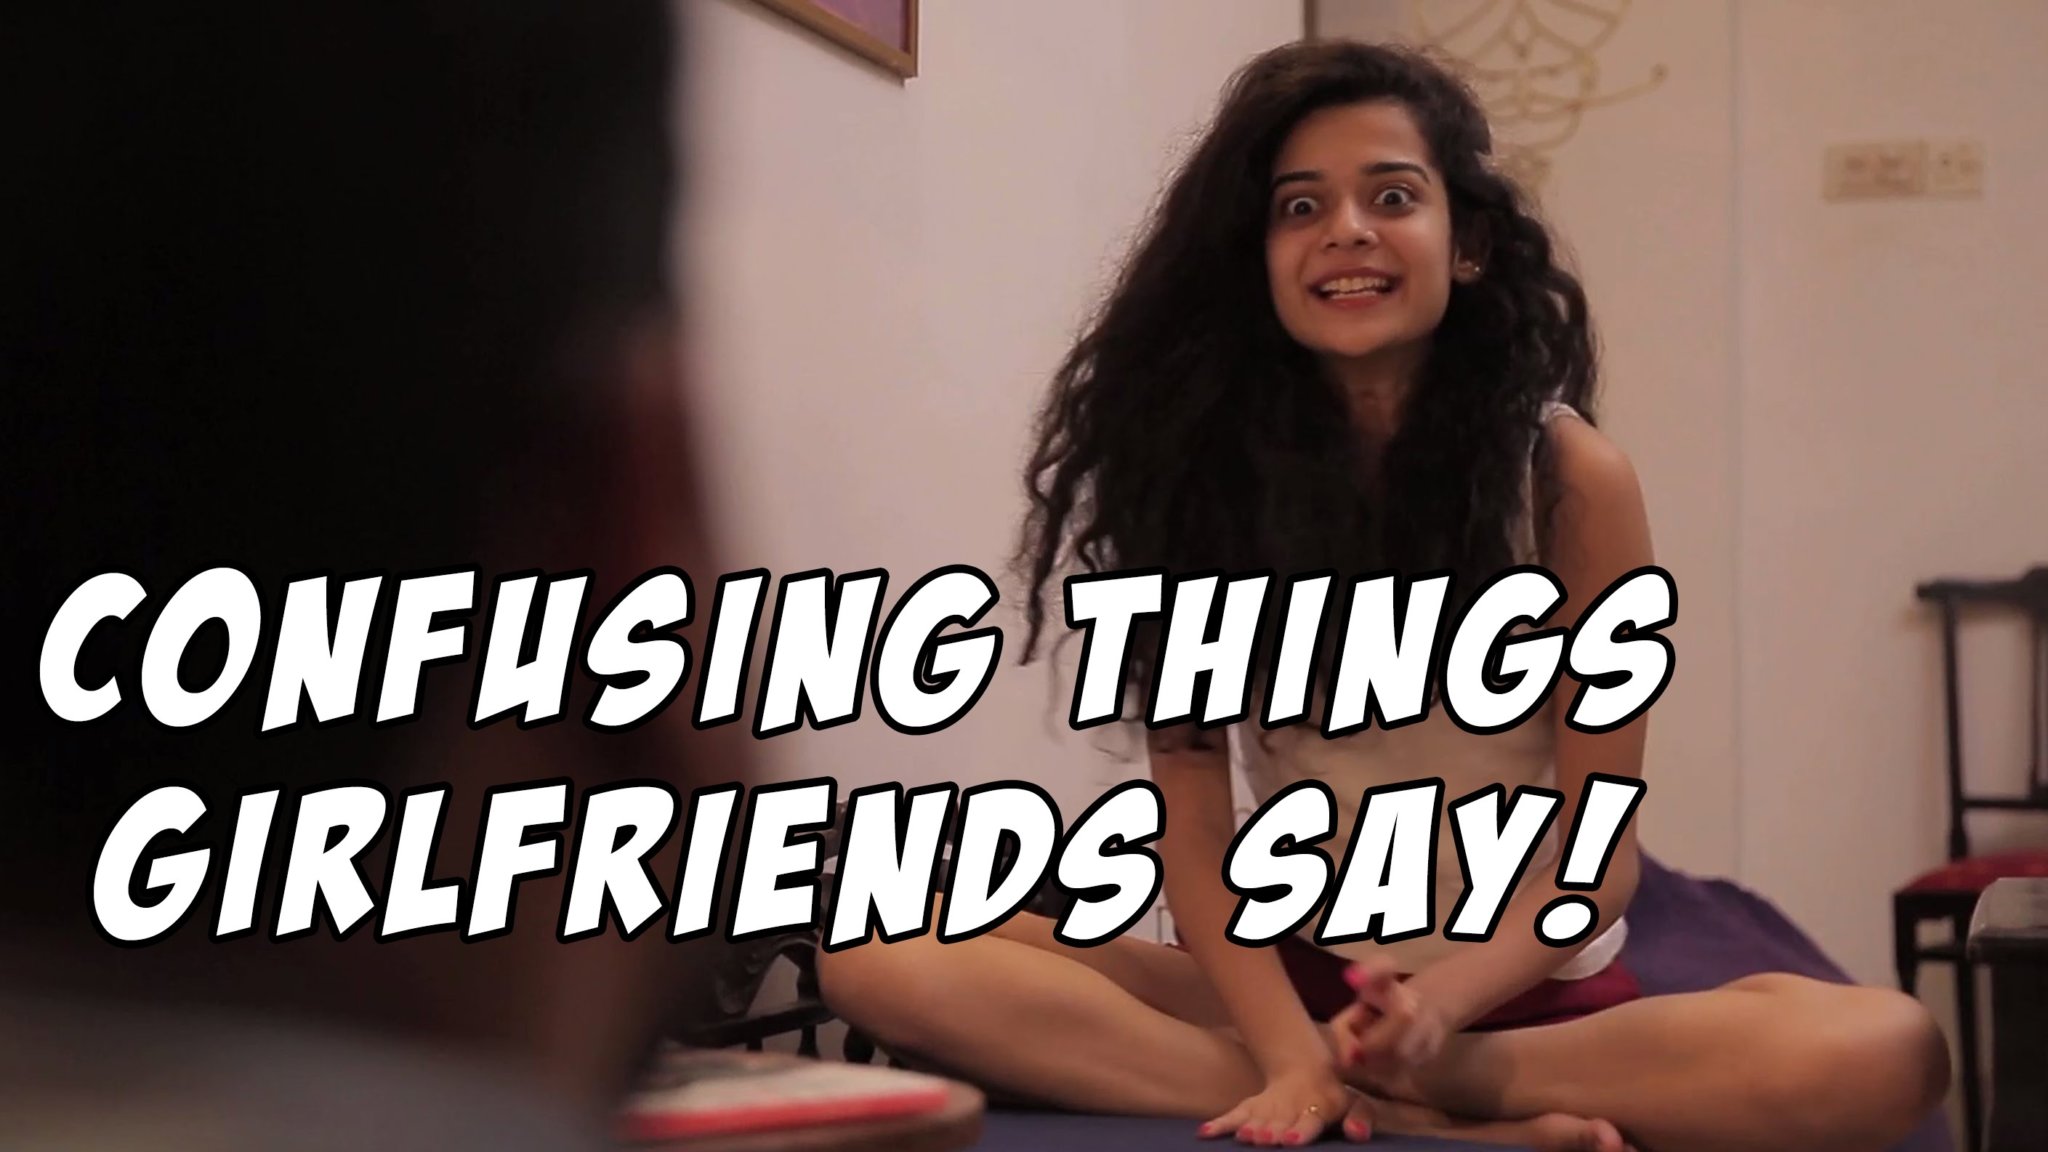 Confusing Things Girlfriends Say Funny Video - Guys World